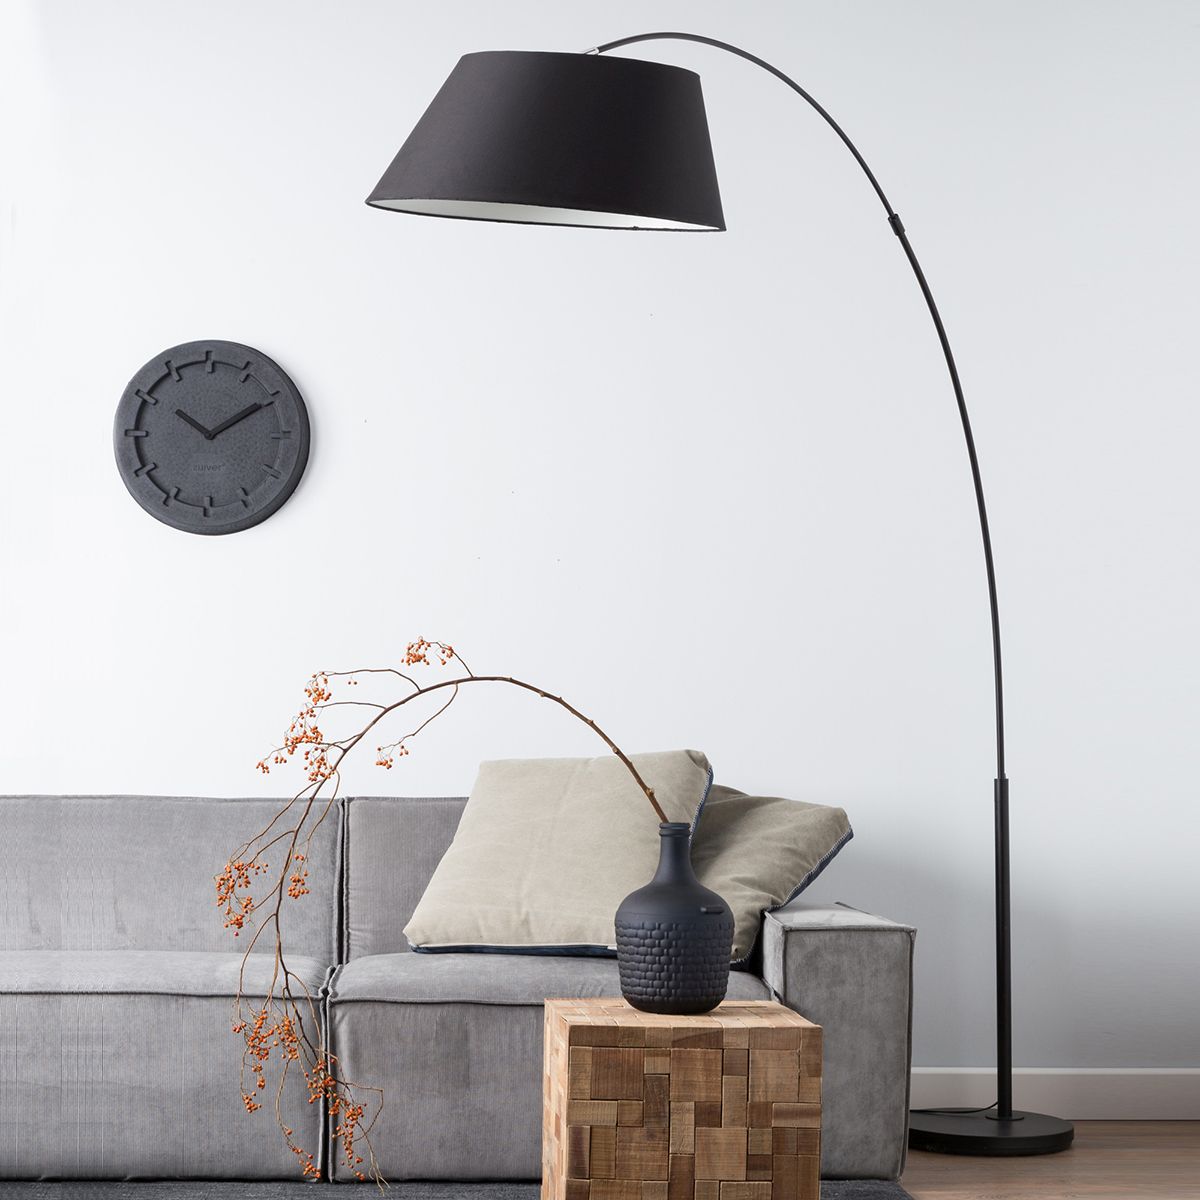 Why you should own an Arc Floor Lamp?